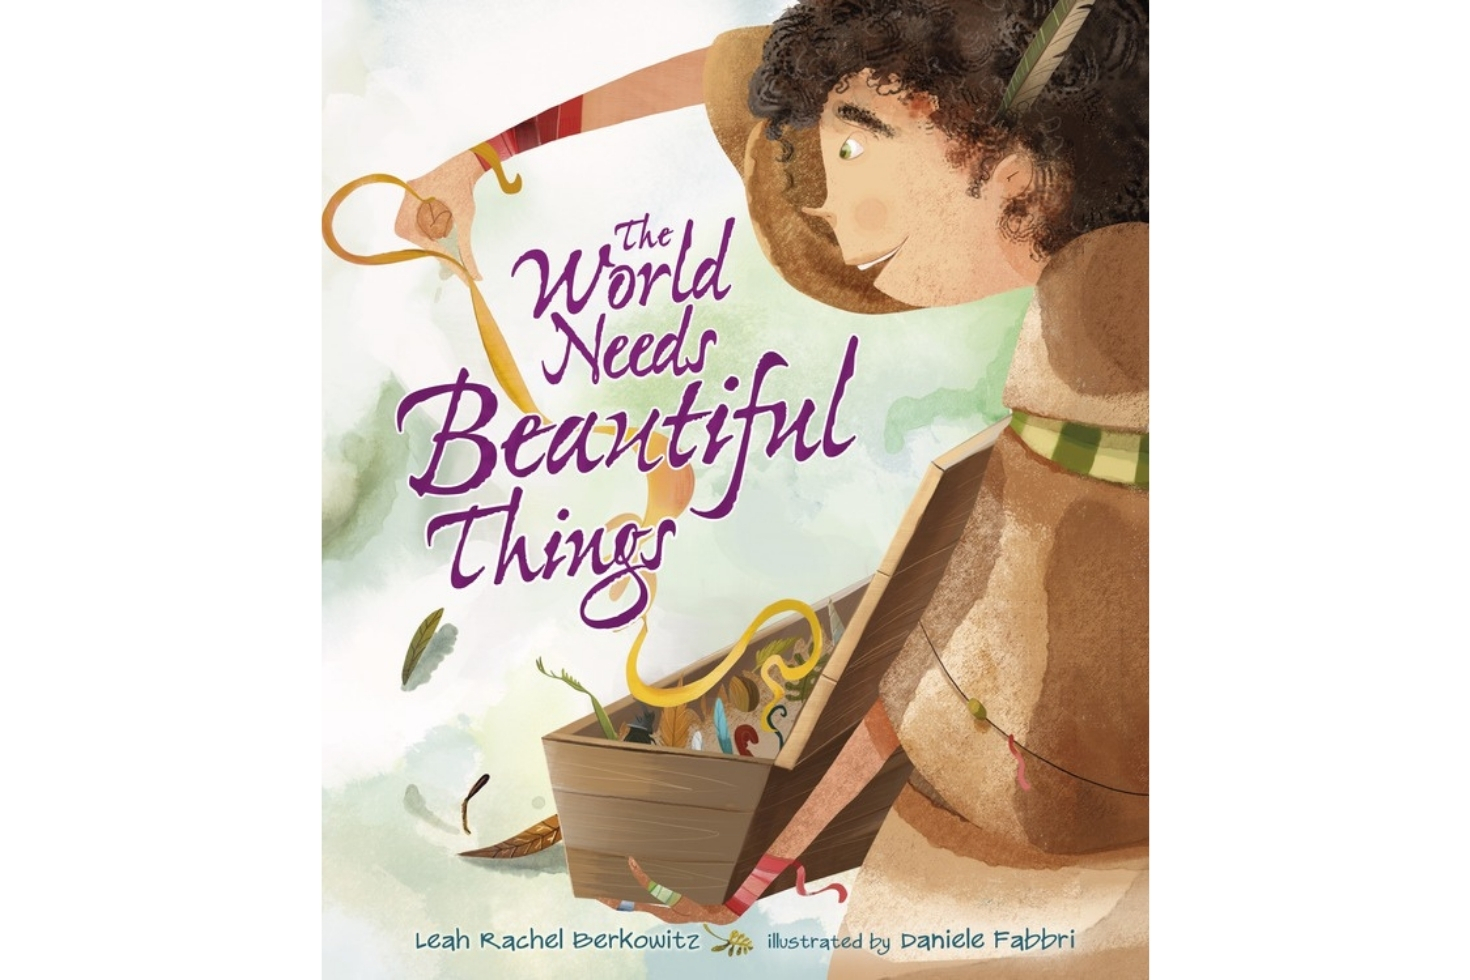 Cover of children's book "The World Needs Beautiful Things"